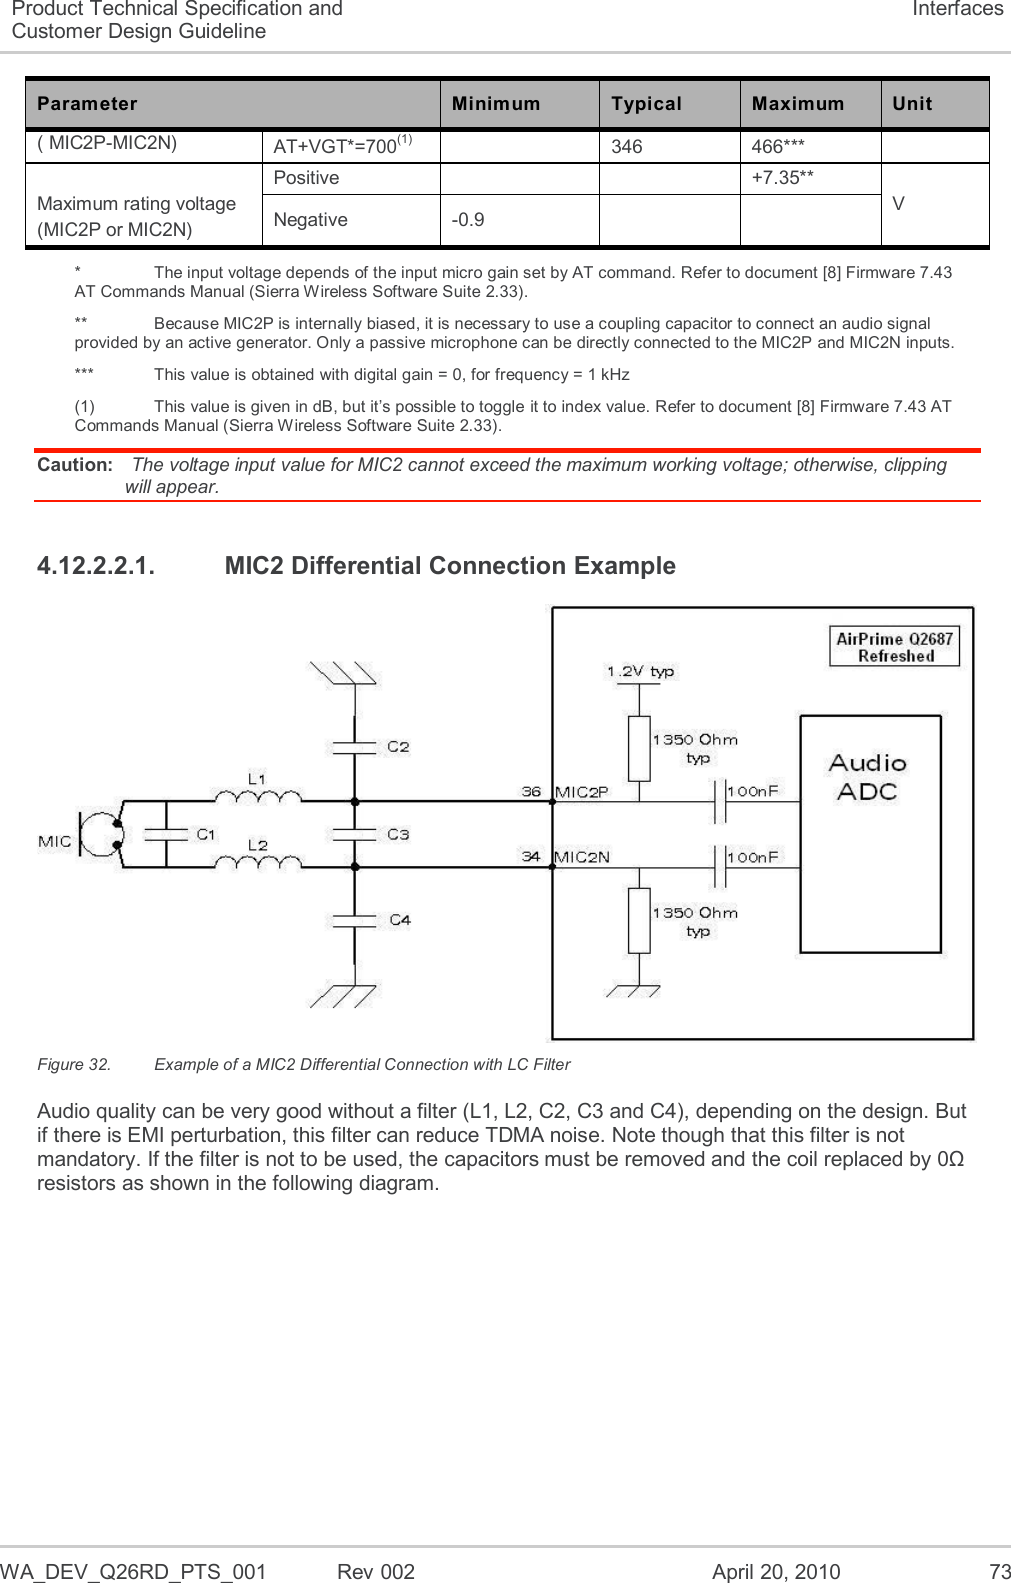  WA_DEV_Q26RD_PTS_001  Rev 002  April 20, 2010 73 Product Technical Specification and Customer Design Guideline Interfaces Parameter Minimum Typical Maximum Unit ( MIC2P-MIC2N) AT+VGT*=700(1)  346 466***  Maximum rating voltage (MIC2P or MIC2N) Positive   +7.35** V Negative -0.9   *    The input voltage depends of the input micro gain set by AT command. Refer to document [8] Firmware 7.43 AT Commands Manual (Sierra Wireless Software Suite 2.33). **    Because MIC2P is internally biased, it is necessary to use a coupling capacitor to connect an audio signal provided by an active generator. Only a passive microphone can be directly connected to the MIC2P and MIC2N inputs.  ***   This value is obtained with digital gain = 0, for frequency = 1 kHz (1)   This value is given in dB, but it’s possible to toggle it to index value. Refer to document [8] Firmware 7.43 AT Commands Manual (Sierra Wireless Software Suite 2.33). Caution:  The voltage input value for MIC2 cannot exceed the maximum working voltage; otherwise, clipping will appear. 4.12.2.2.1.  MIC2 Differential Connection Example  Figure 32.  Example of a MIC2 Differential Connection with LC Filter Audio quality can be very good without a filter (L1, L2, C2, C3 and C4), depending on the design. But if there is EMI perturbation, this filter can reduce TDMA noise. Note though that this filter is not mandatory. If the filter is not to be used, the capacitors must be removed and the coil replaced by 0Ω resistors as shown in the following diagram. 